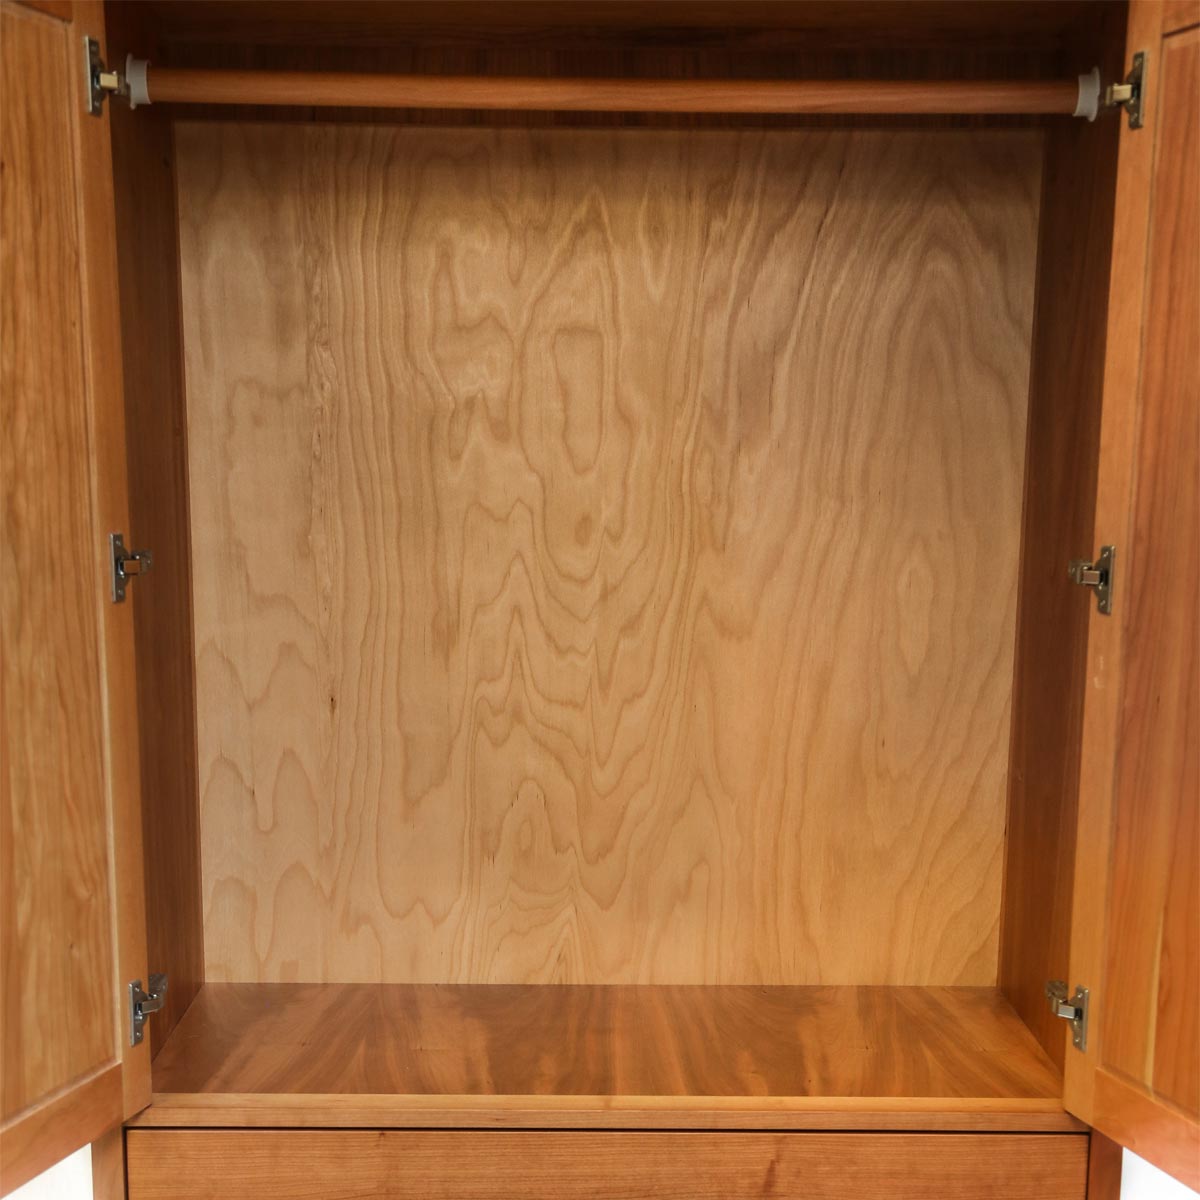 Storage space of classic cherry Shaker wardrobe, from Maine's Chilton Furniture Co. 